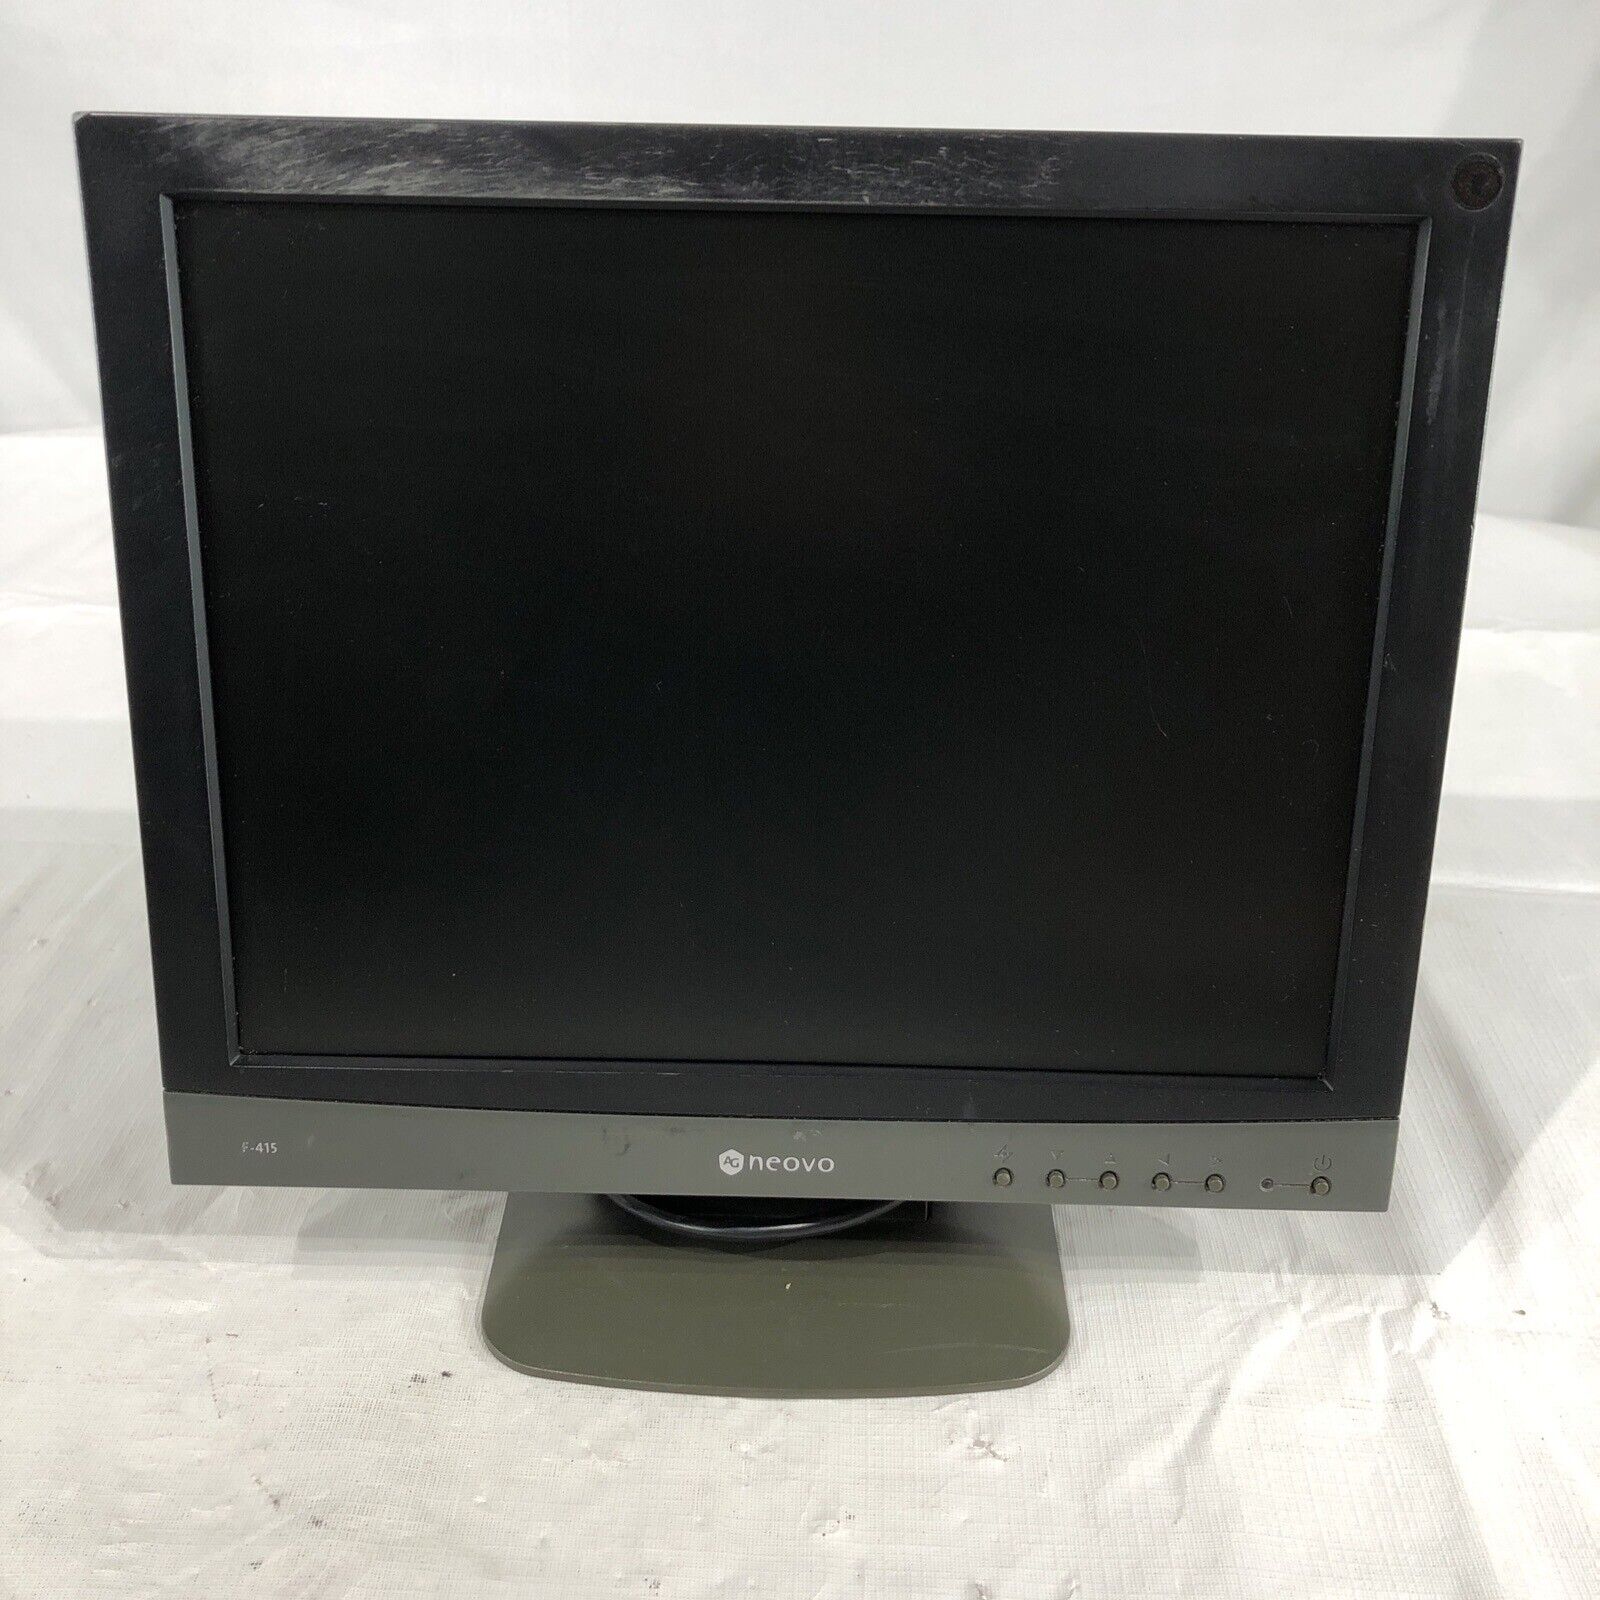 Neovo F-419 Computer Monitor- Tested, working